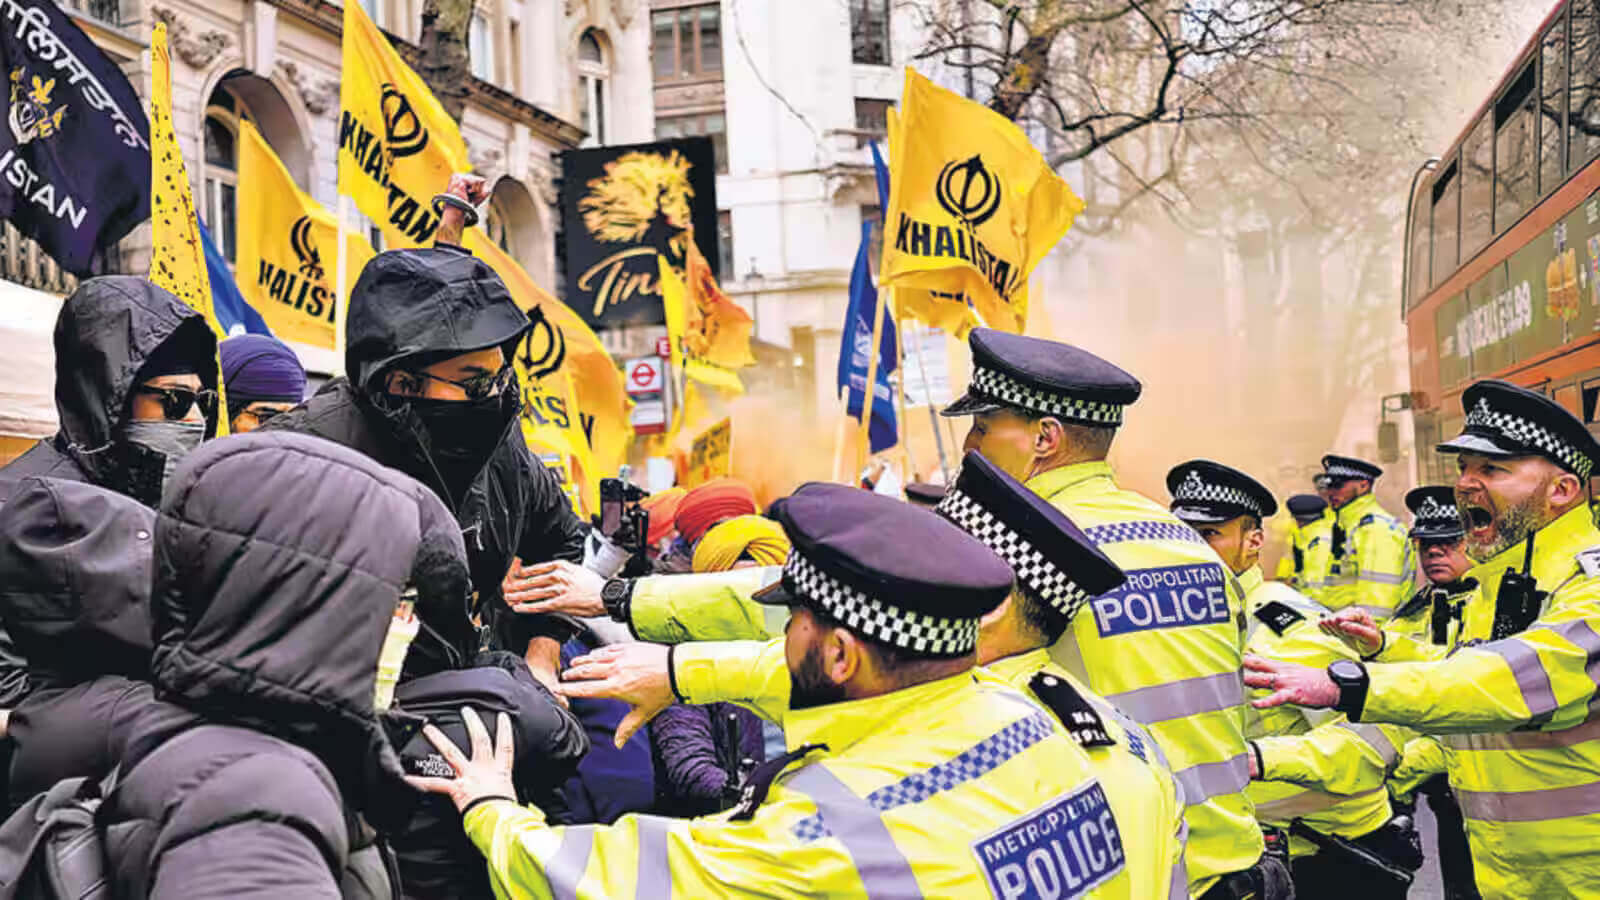 Delhi Police Files FIR Against Pro-Khalistan Indian Citizens Protesting in London